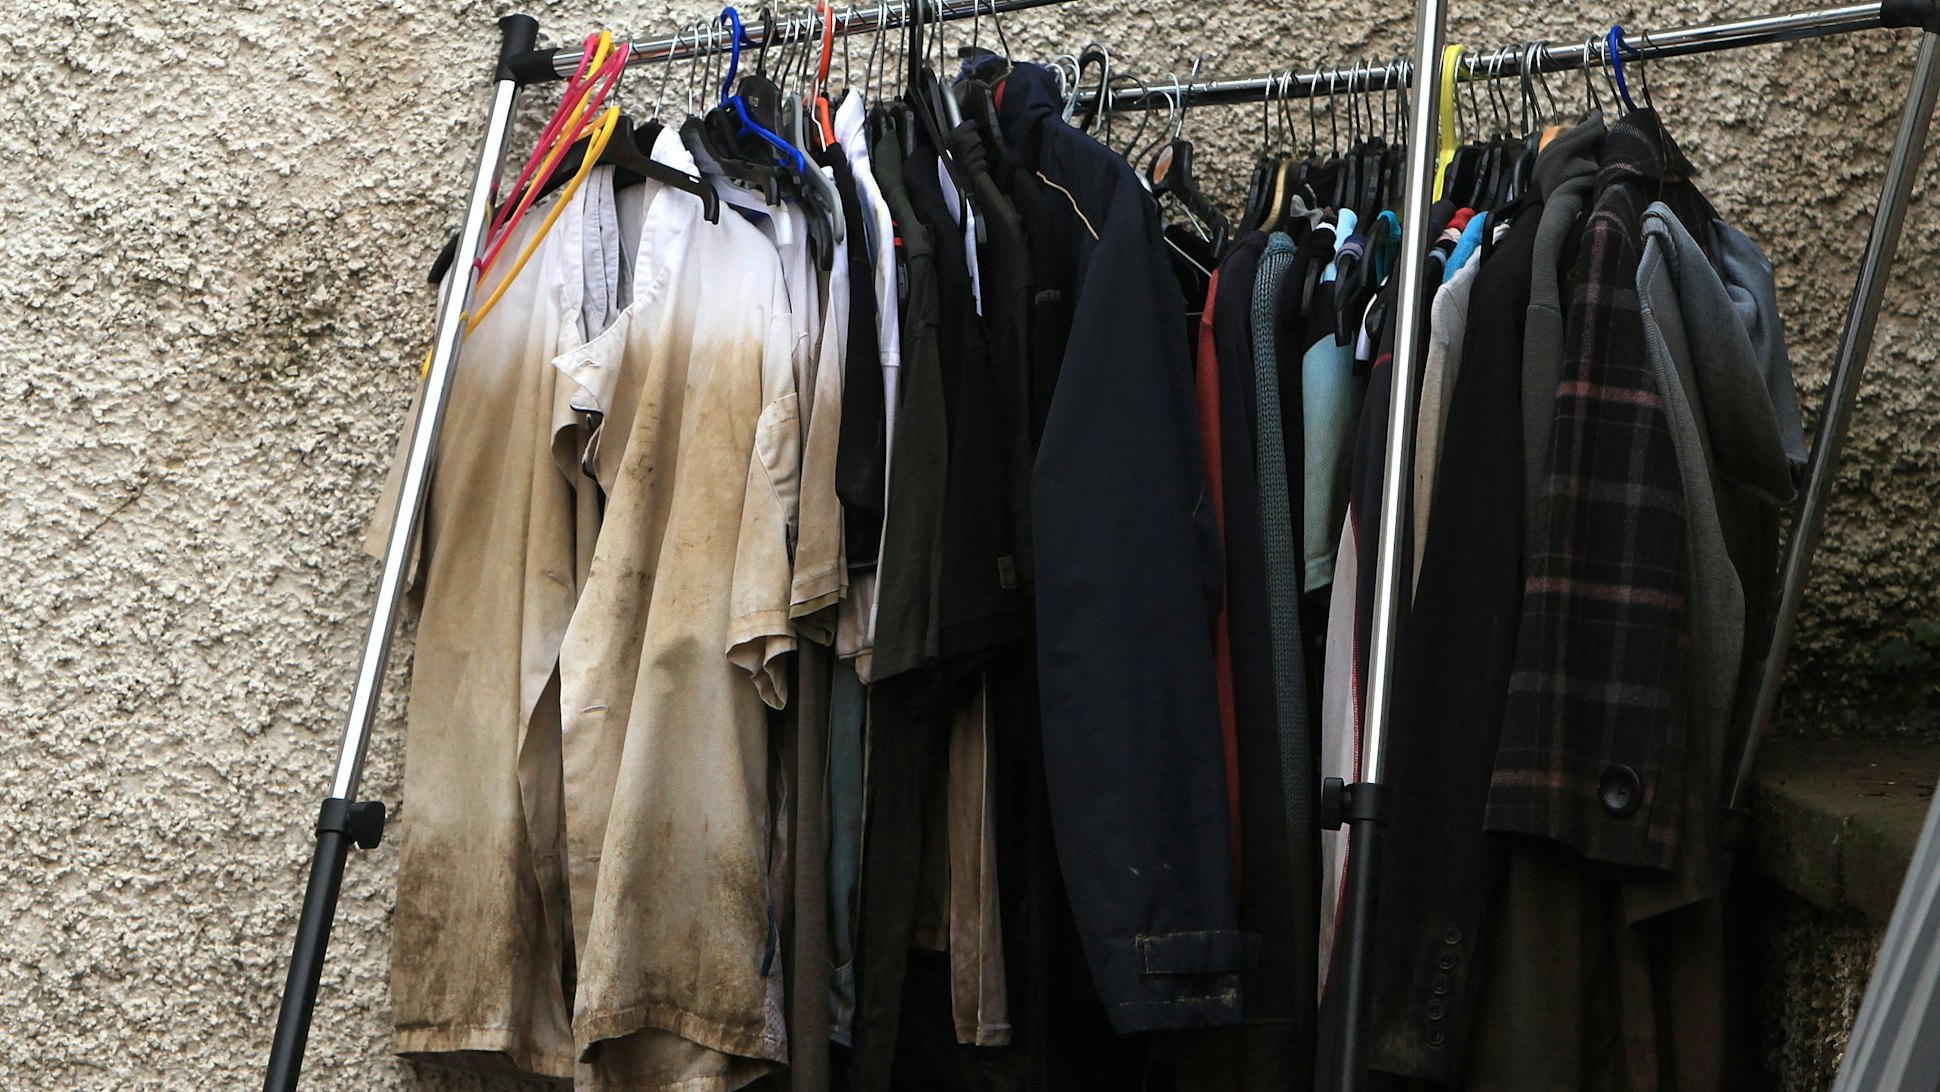 11 Tips For Selling Your Clothes At A Secondhand Store, According To Store Employees